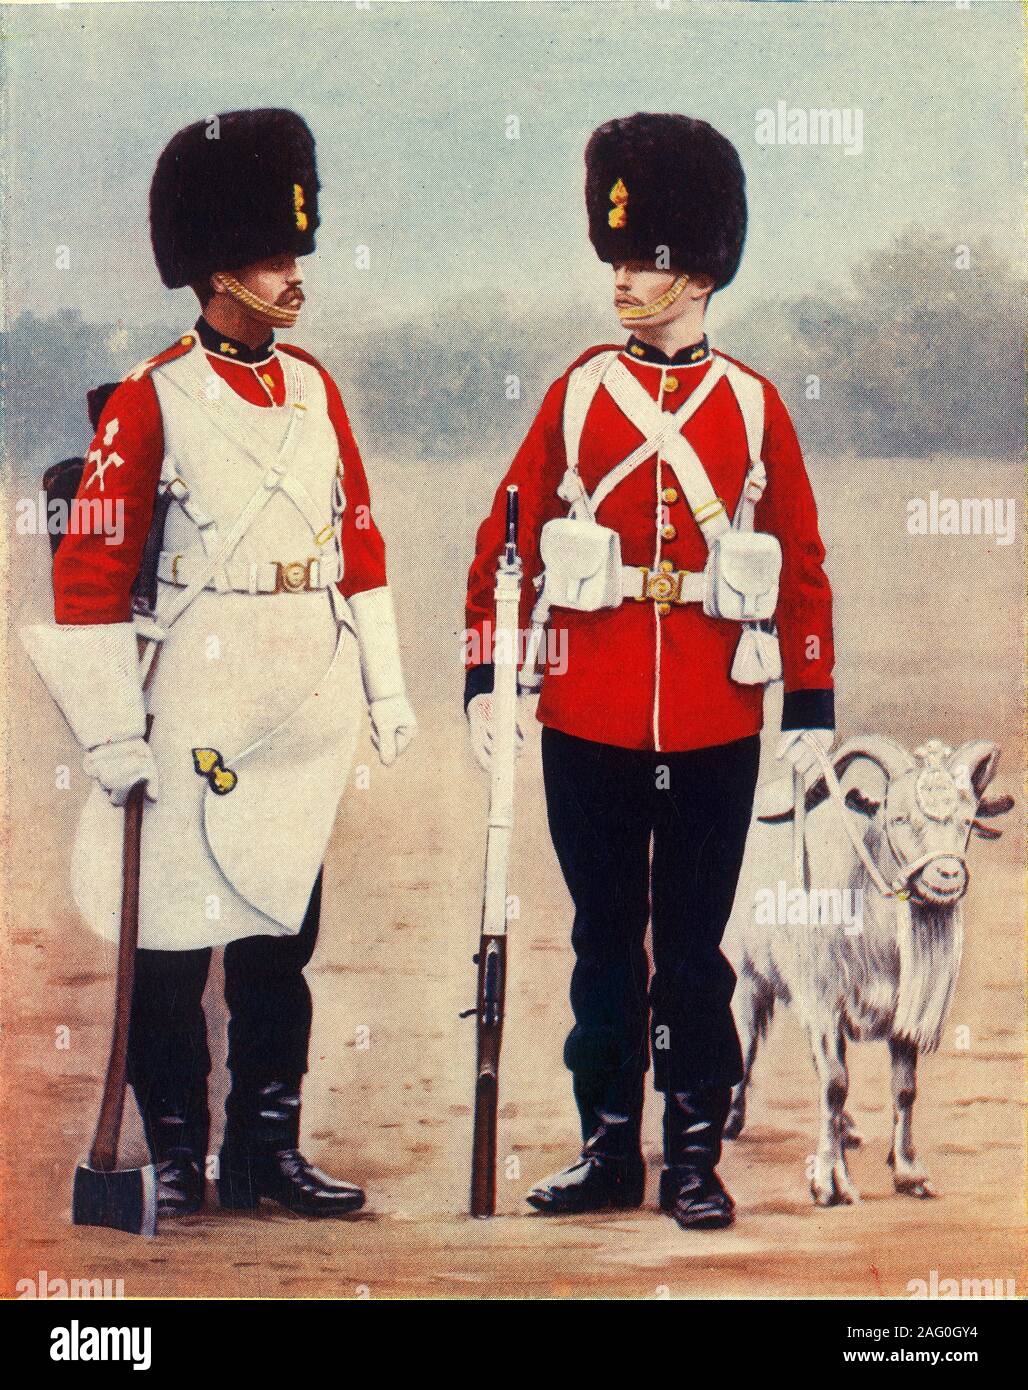 'The Royal Welsh Fusiliers', 1901. The 1st battalion of the Royal Welsh Fusiliers line infantry regiment of the British Army served in the 1899 to 1902 Second Boer War. From &quot;South Africa and the Transvaal War, Vol. VI&quot;, by Louis Creswicke. [T. C. &amp; E. C. Jack, Edinburgh, 1901] Stock Photo